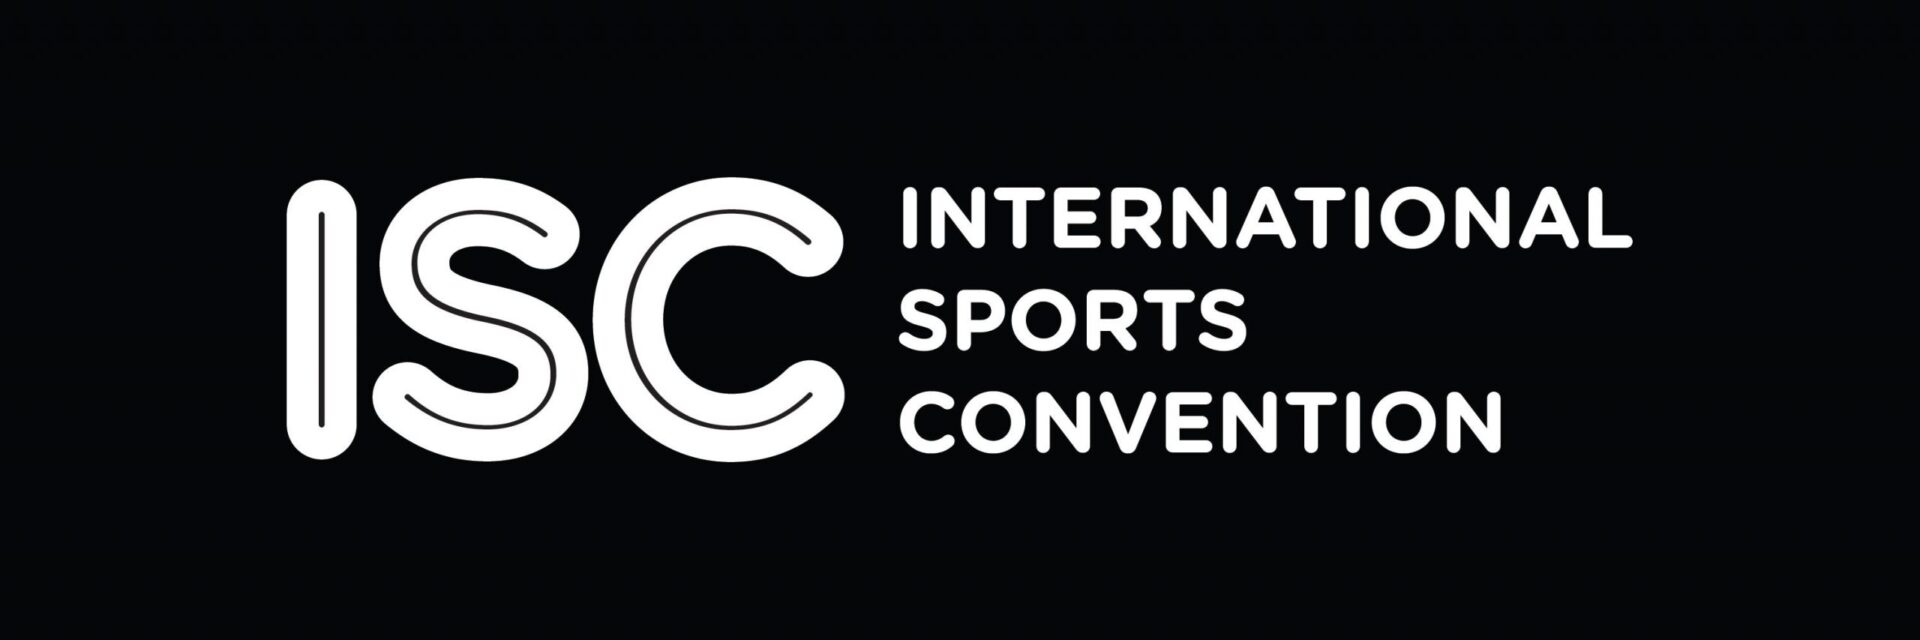 INTERNATIONAL SPORTS CONVENTION -theentertainment.vision